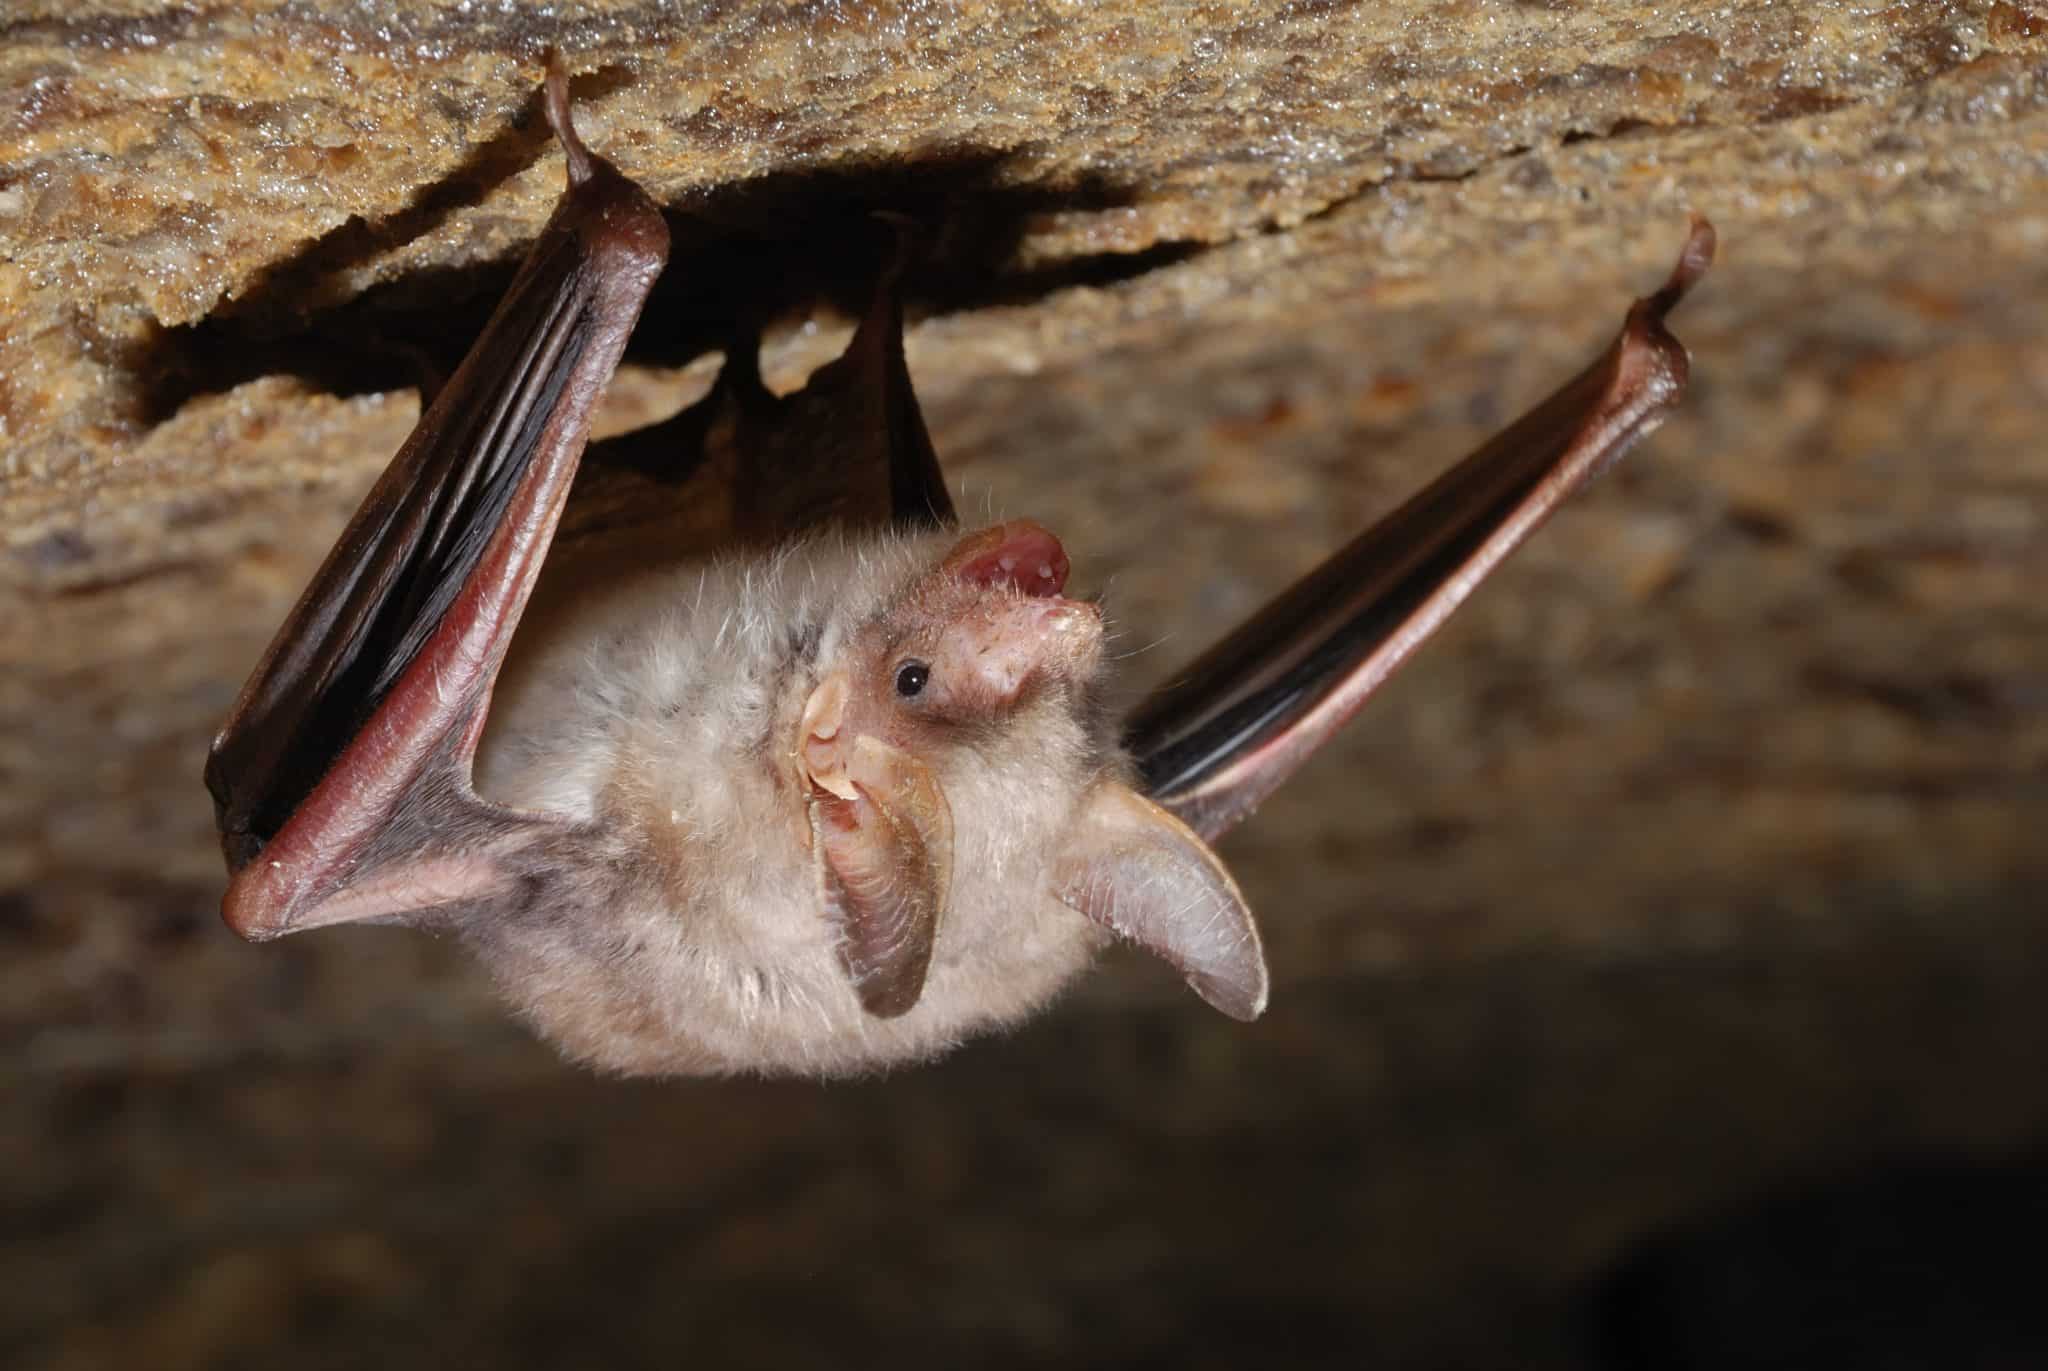 How To Get Rid Of Bats In The Attic